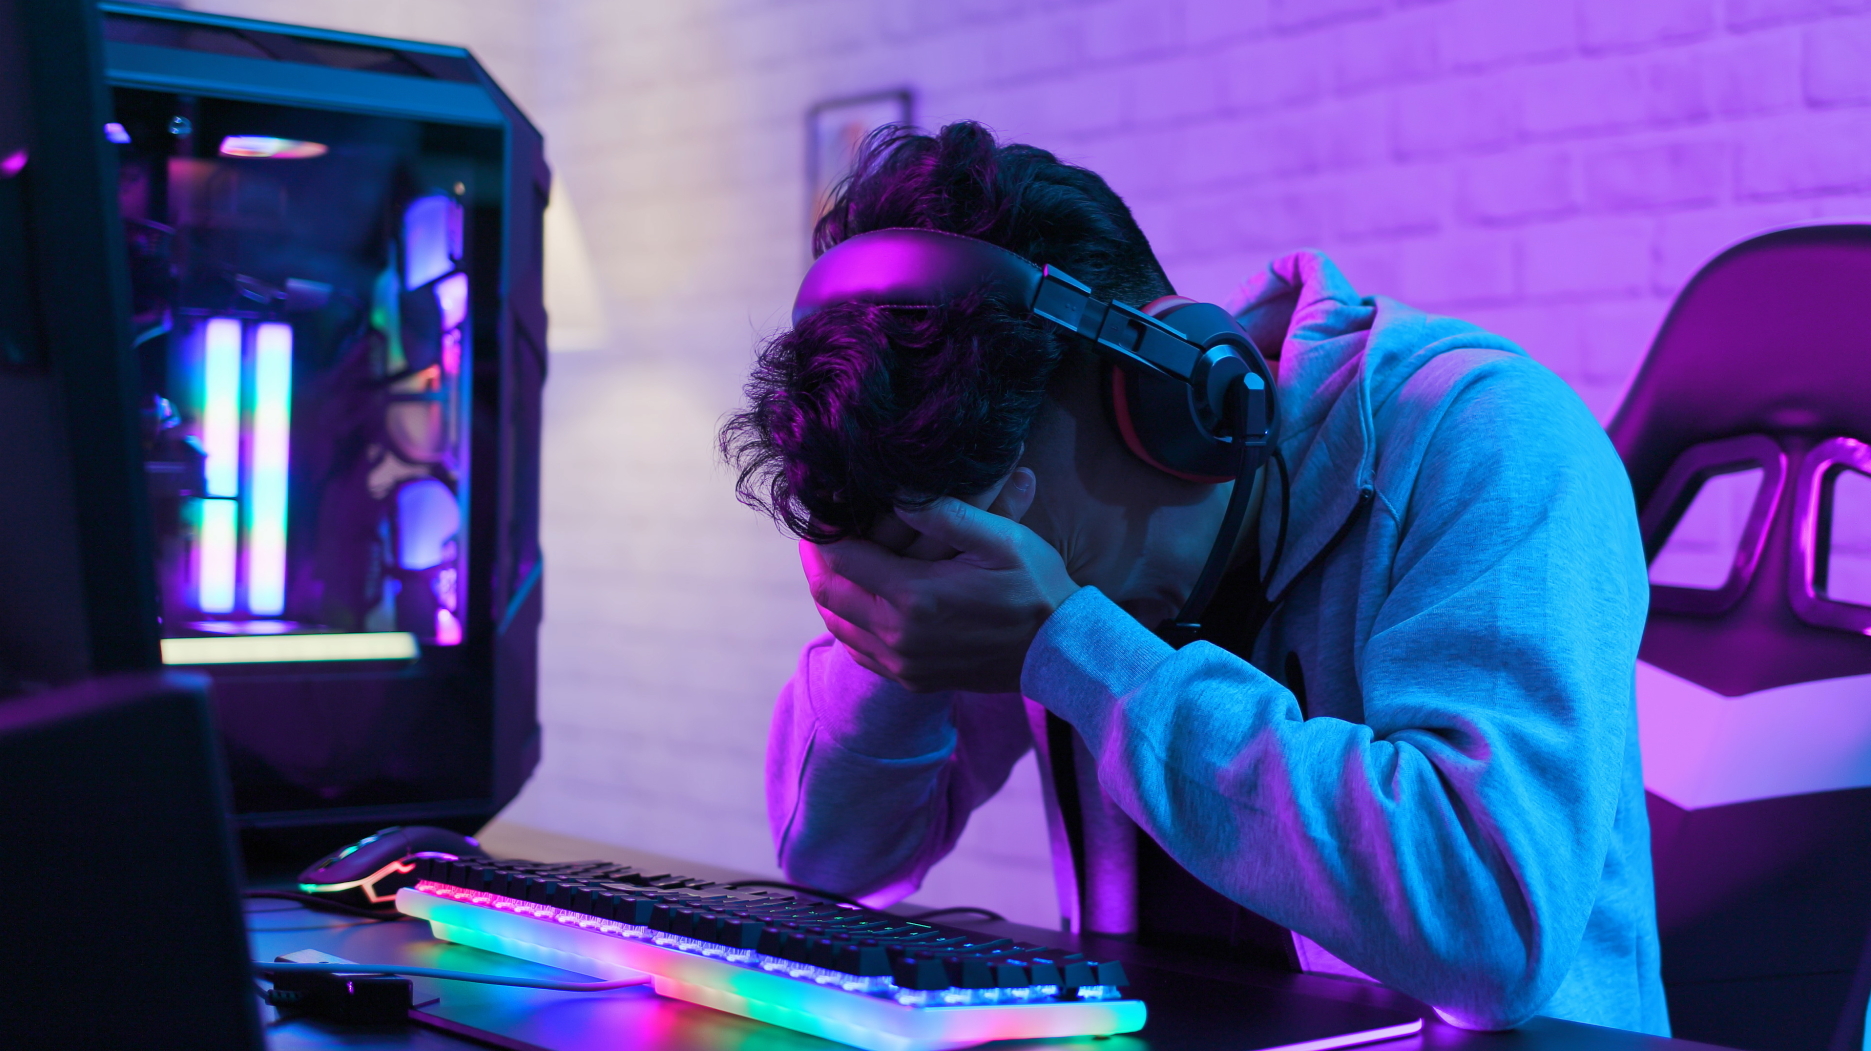 Upset PC gamer with head in hands by his PC